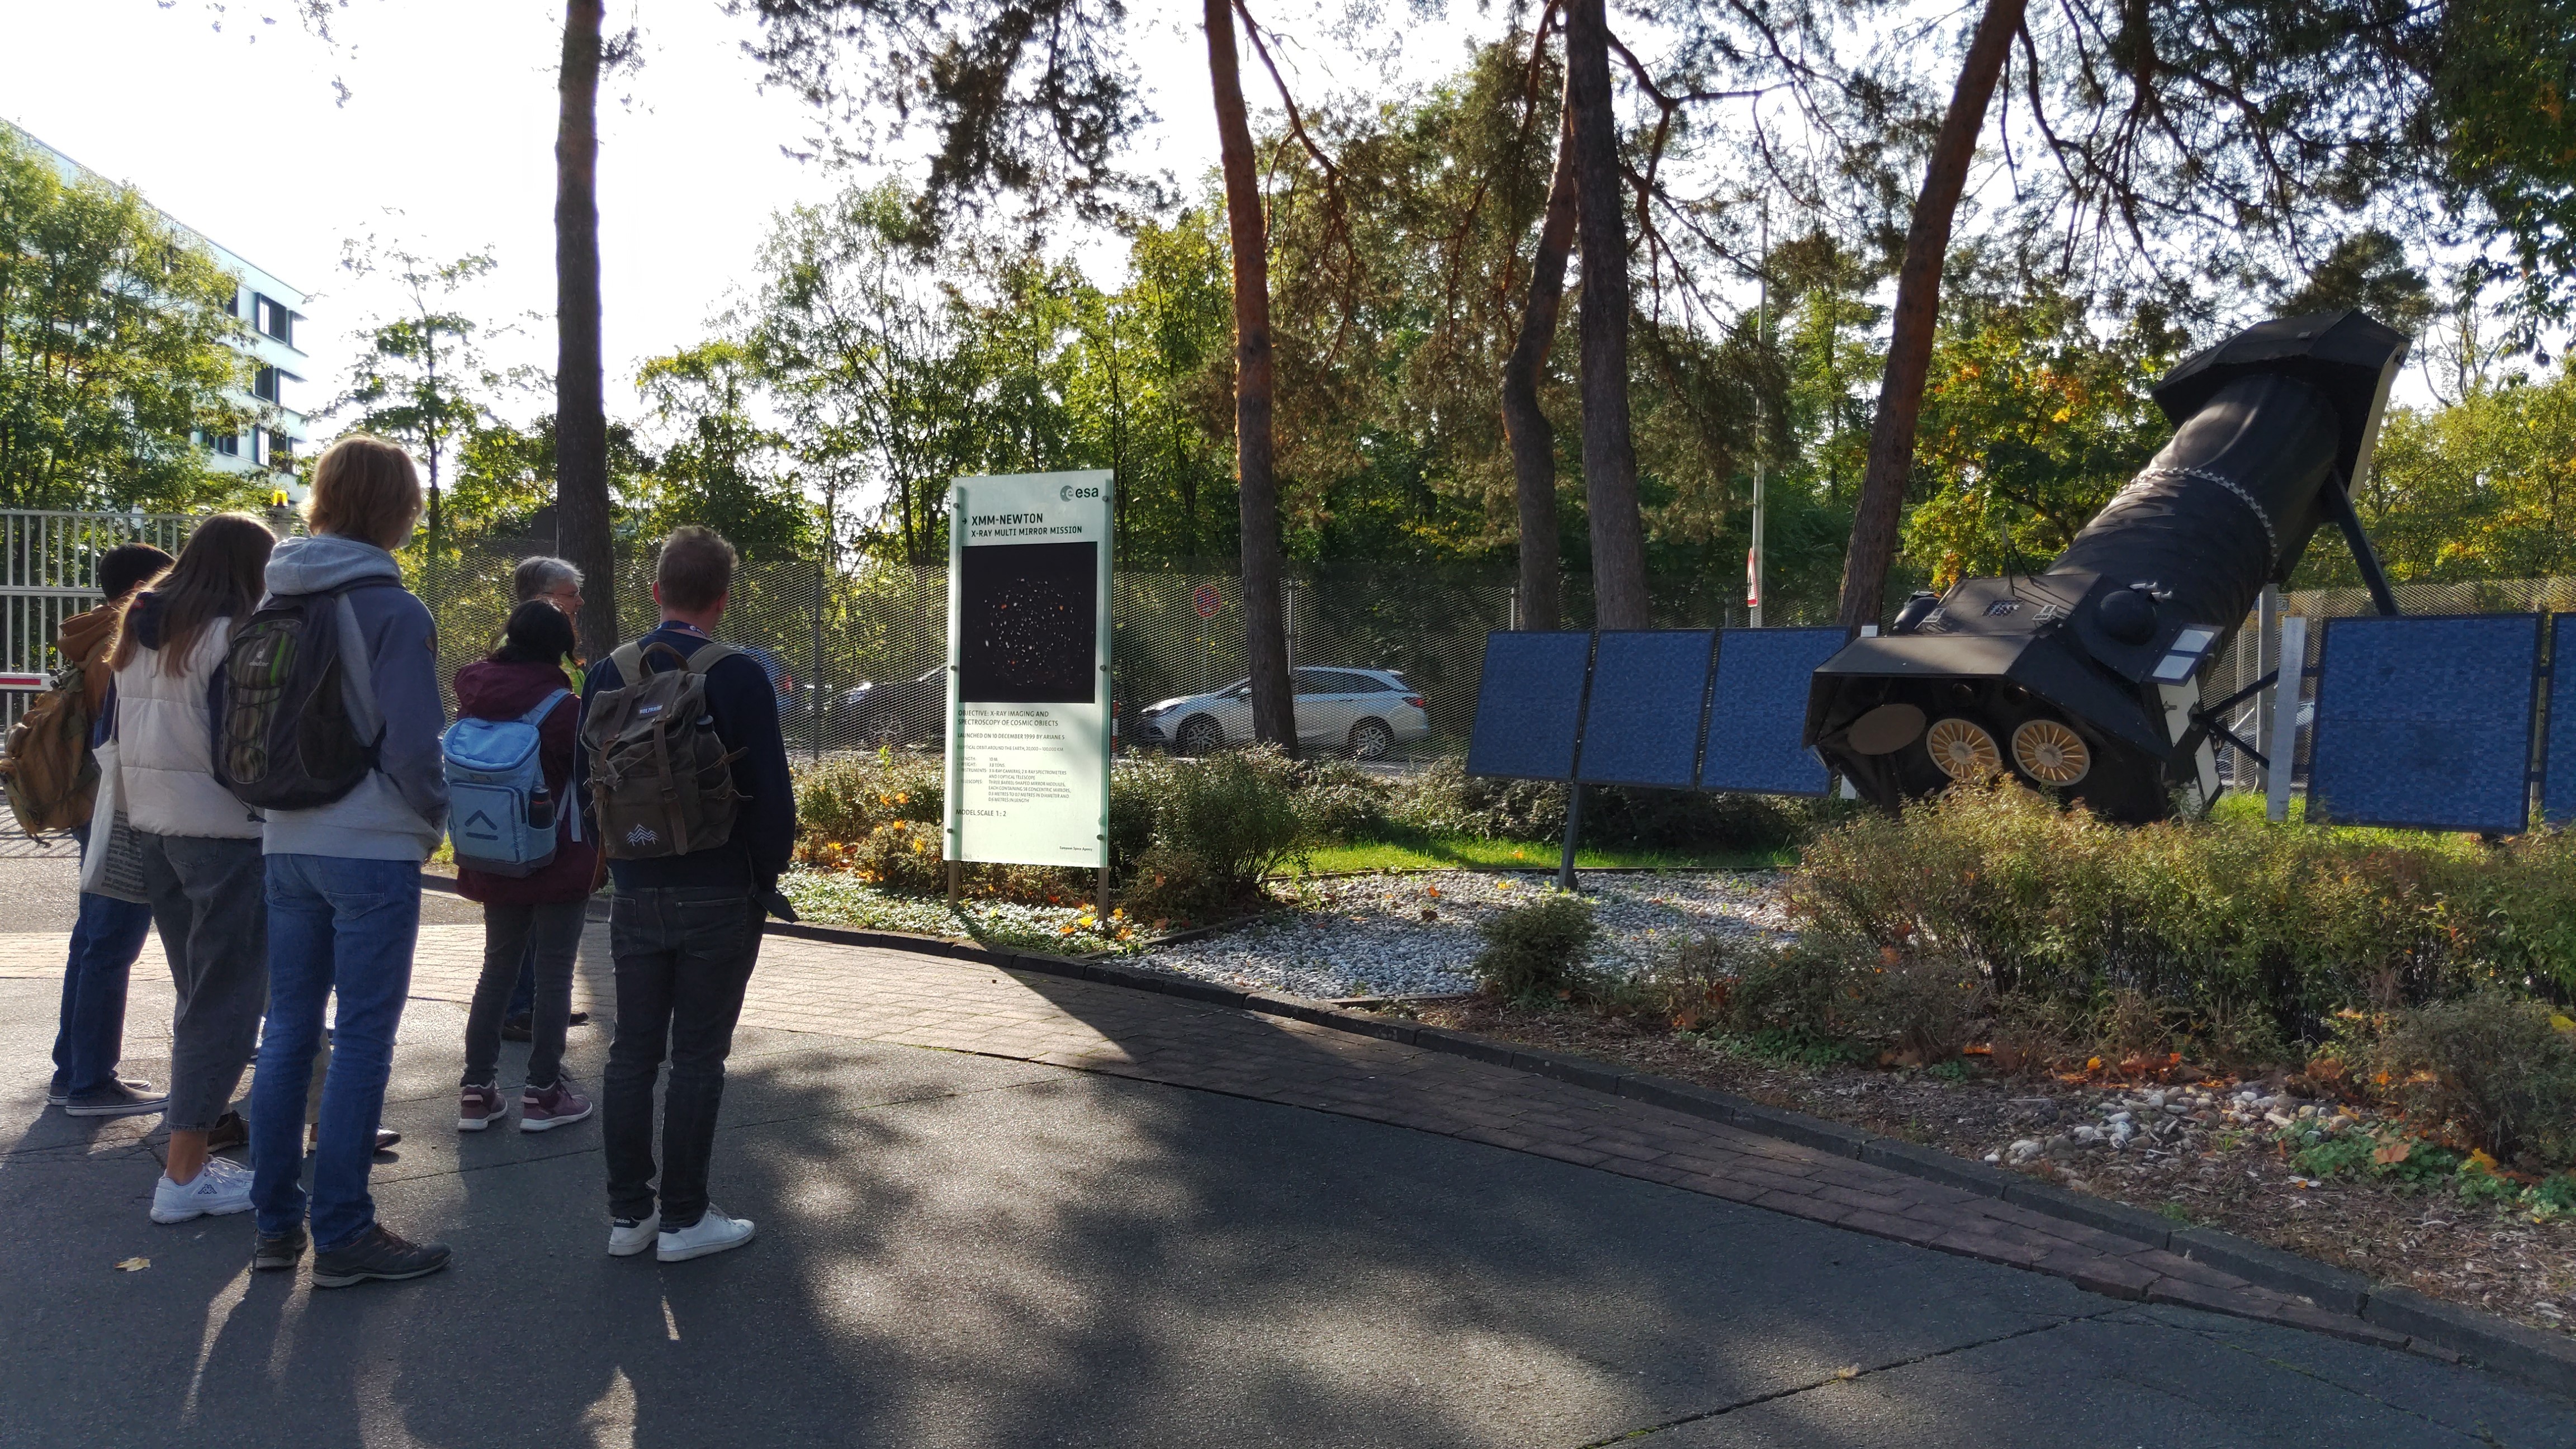 A group of people looking at a satellite model at the border of the ESOC facility in Darmstadt with trees in the background.